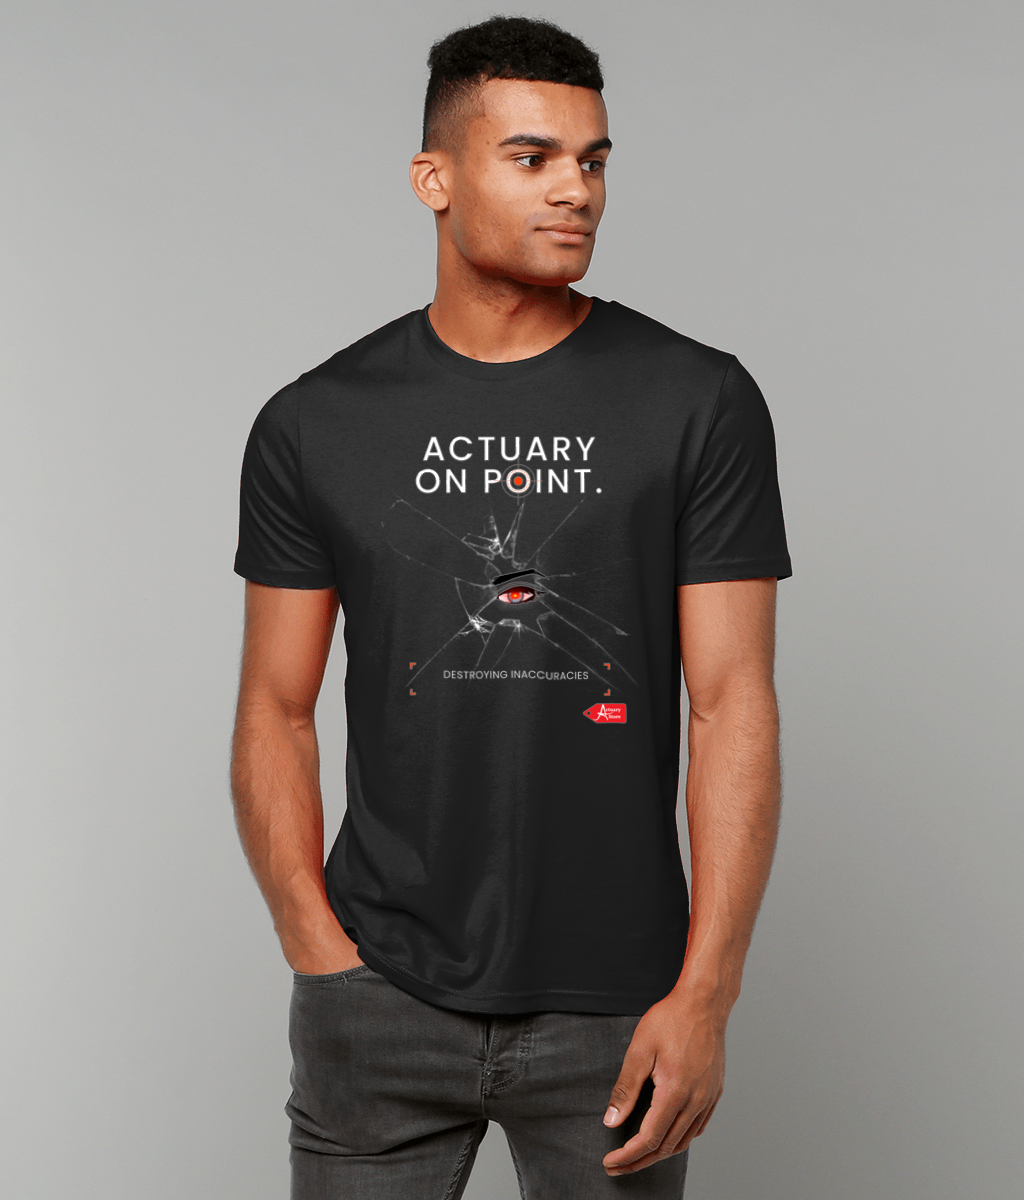 Actuary On Point Black White Red Modern On Point Destroying Inaccuracies Black T-Shirt